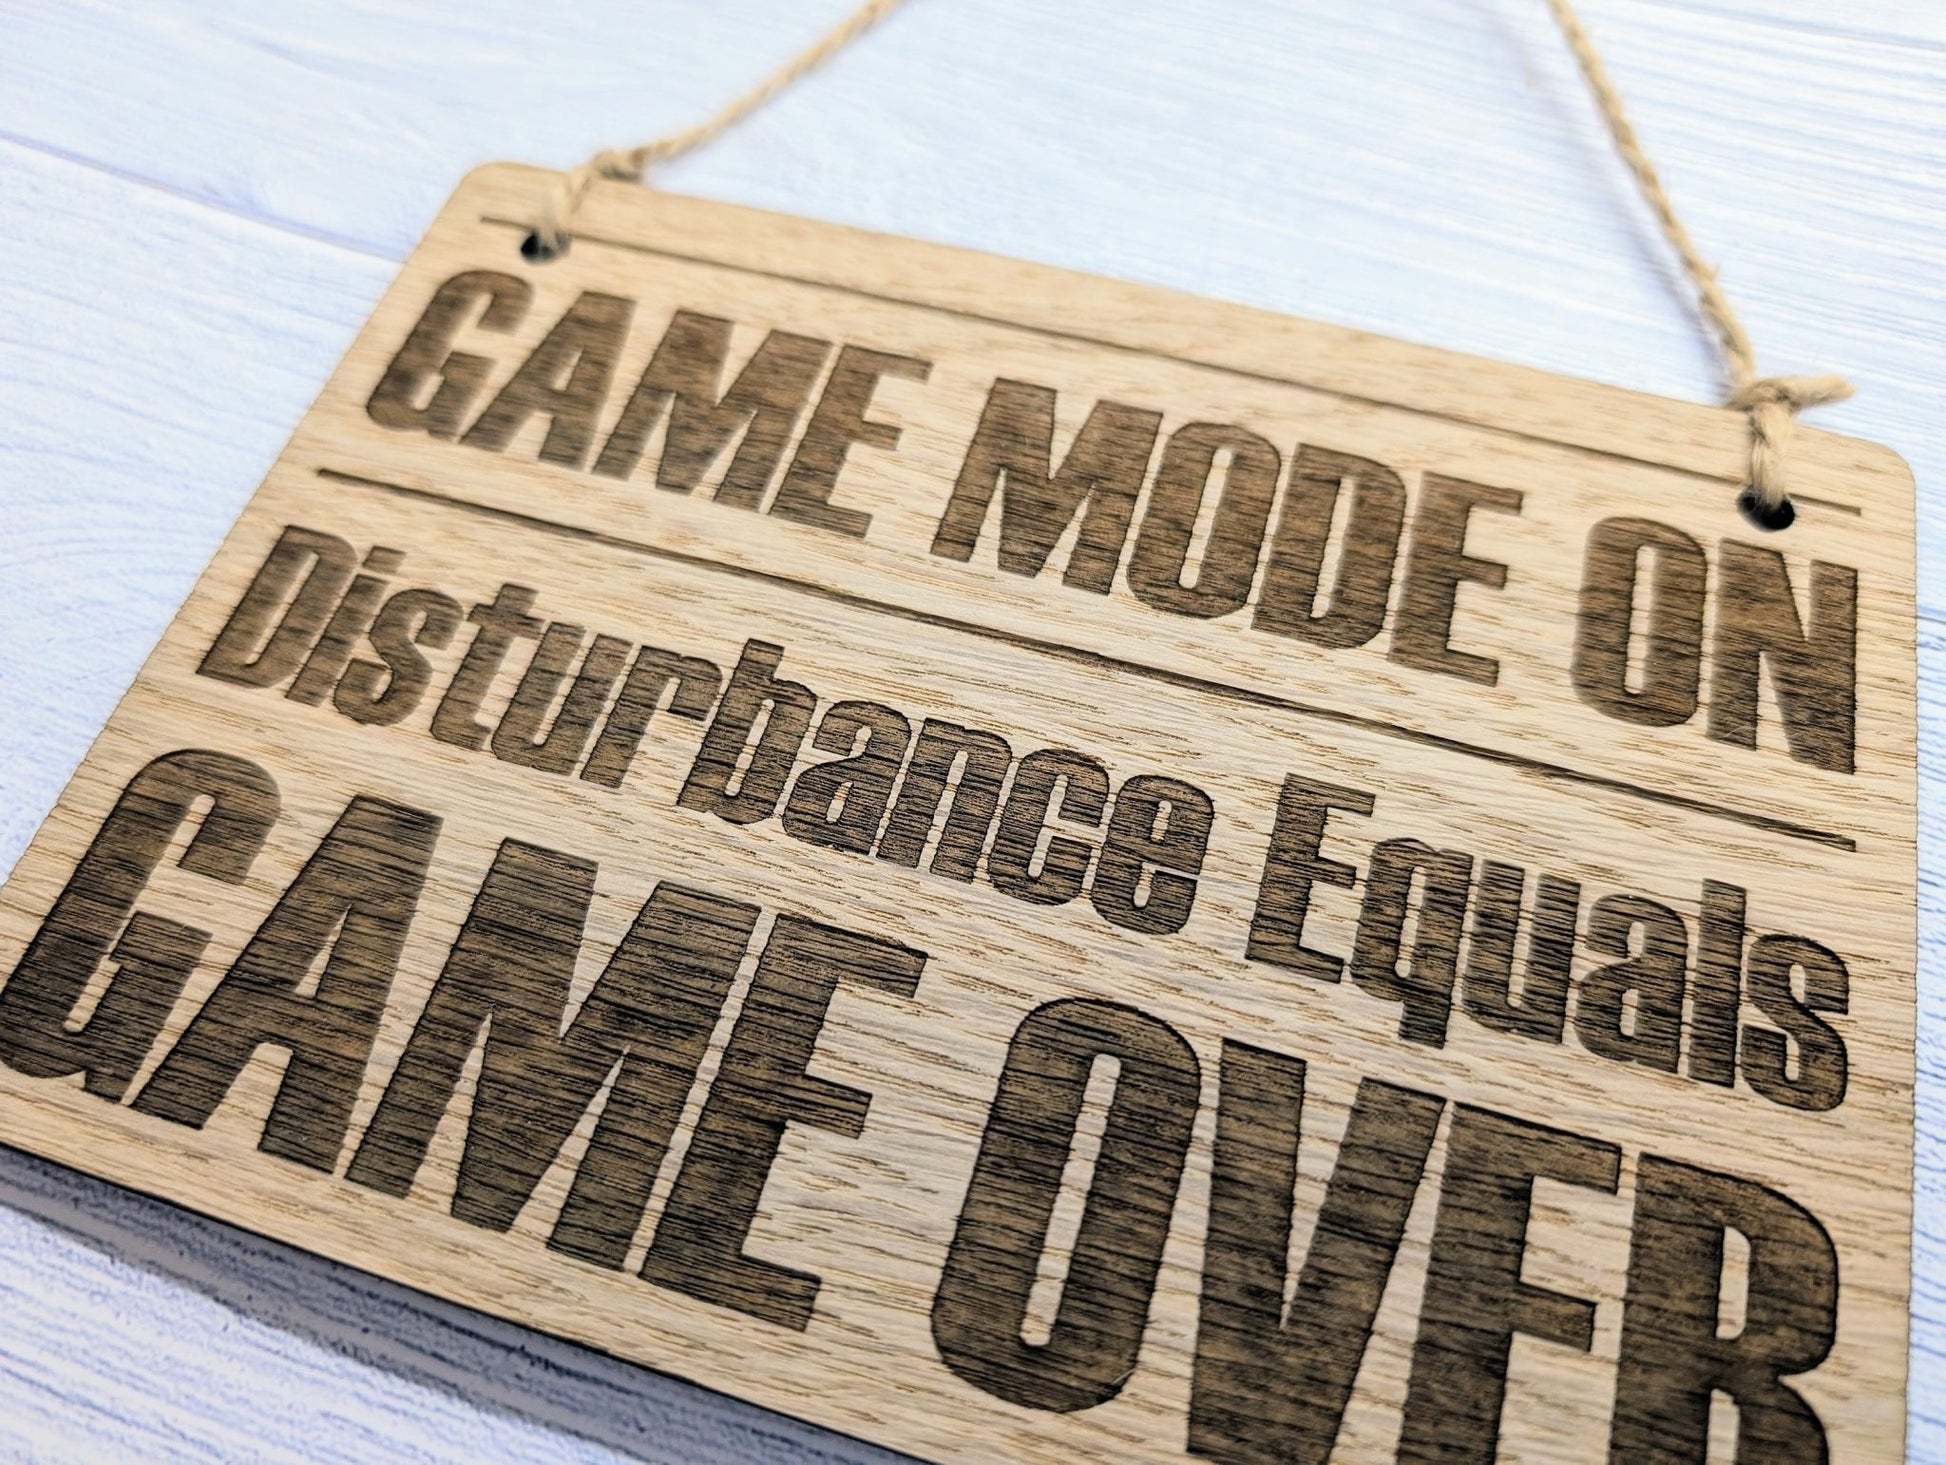 GAME MODE ON - Wooden Sign - CherryGroveCraft